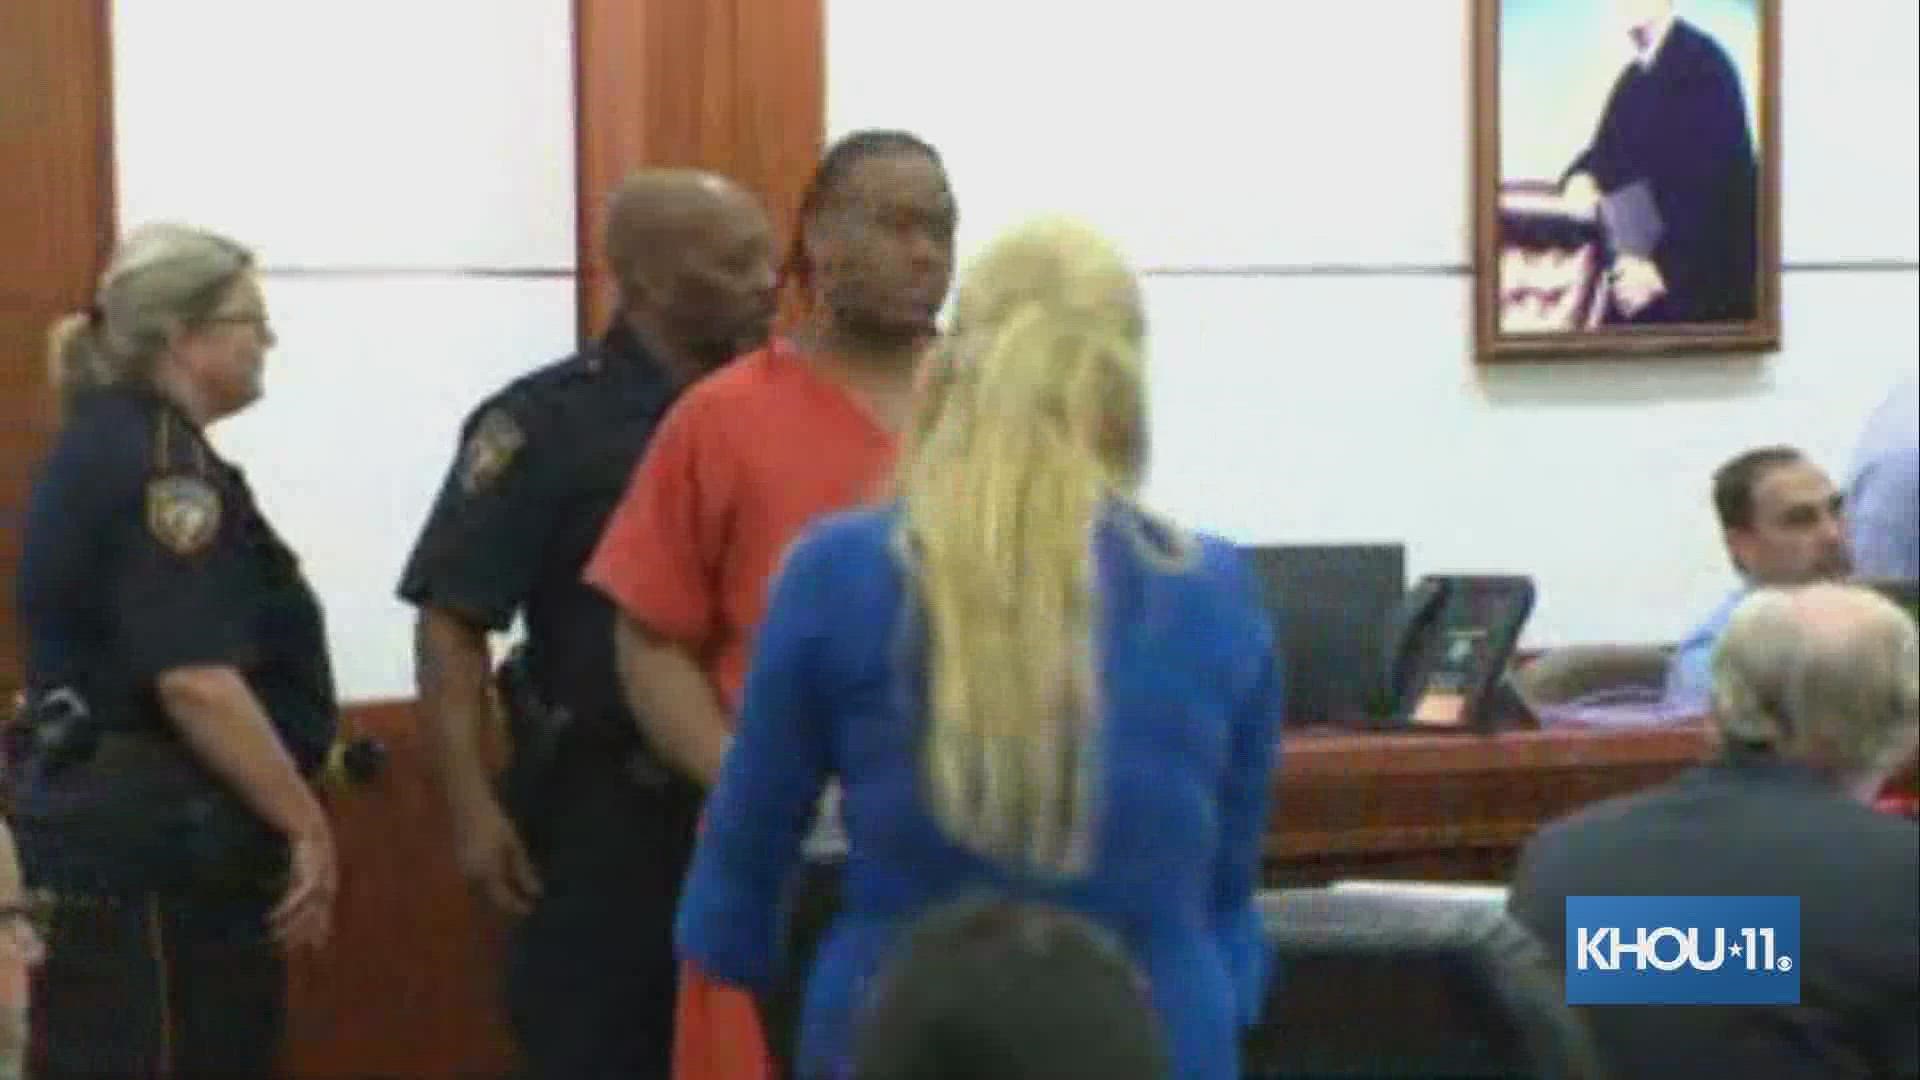 The man charged with murder in the shooting death of Migos rapper TakeOff was back in court Monday morning.